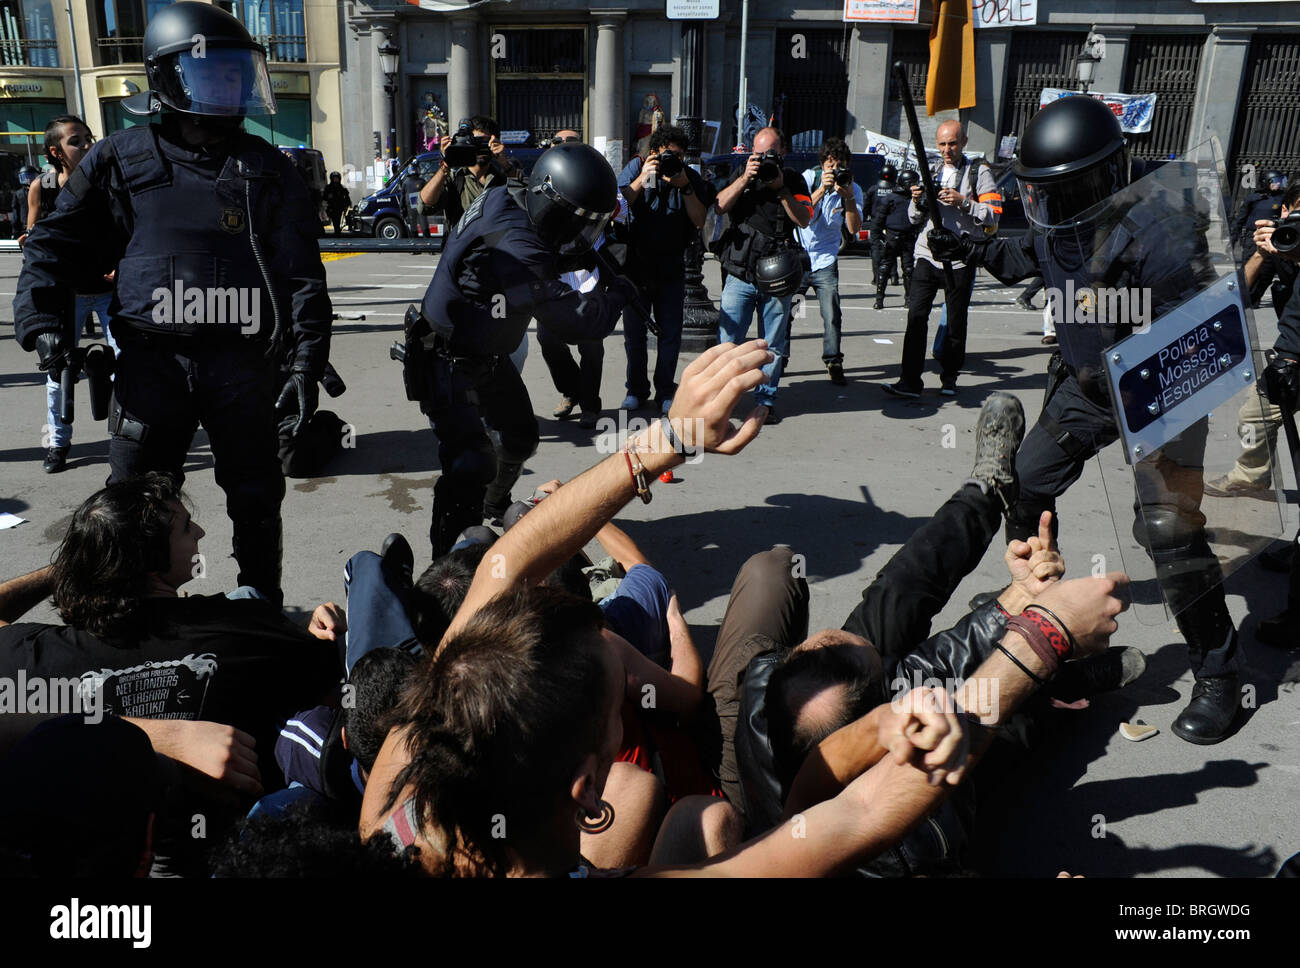 Anti Riot police beating demonstrators anti system in the clashes at the city center during the general strike. Barcelona.Spain. Stock Photo